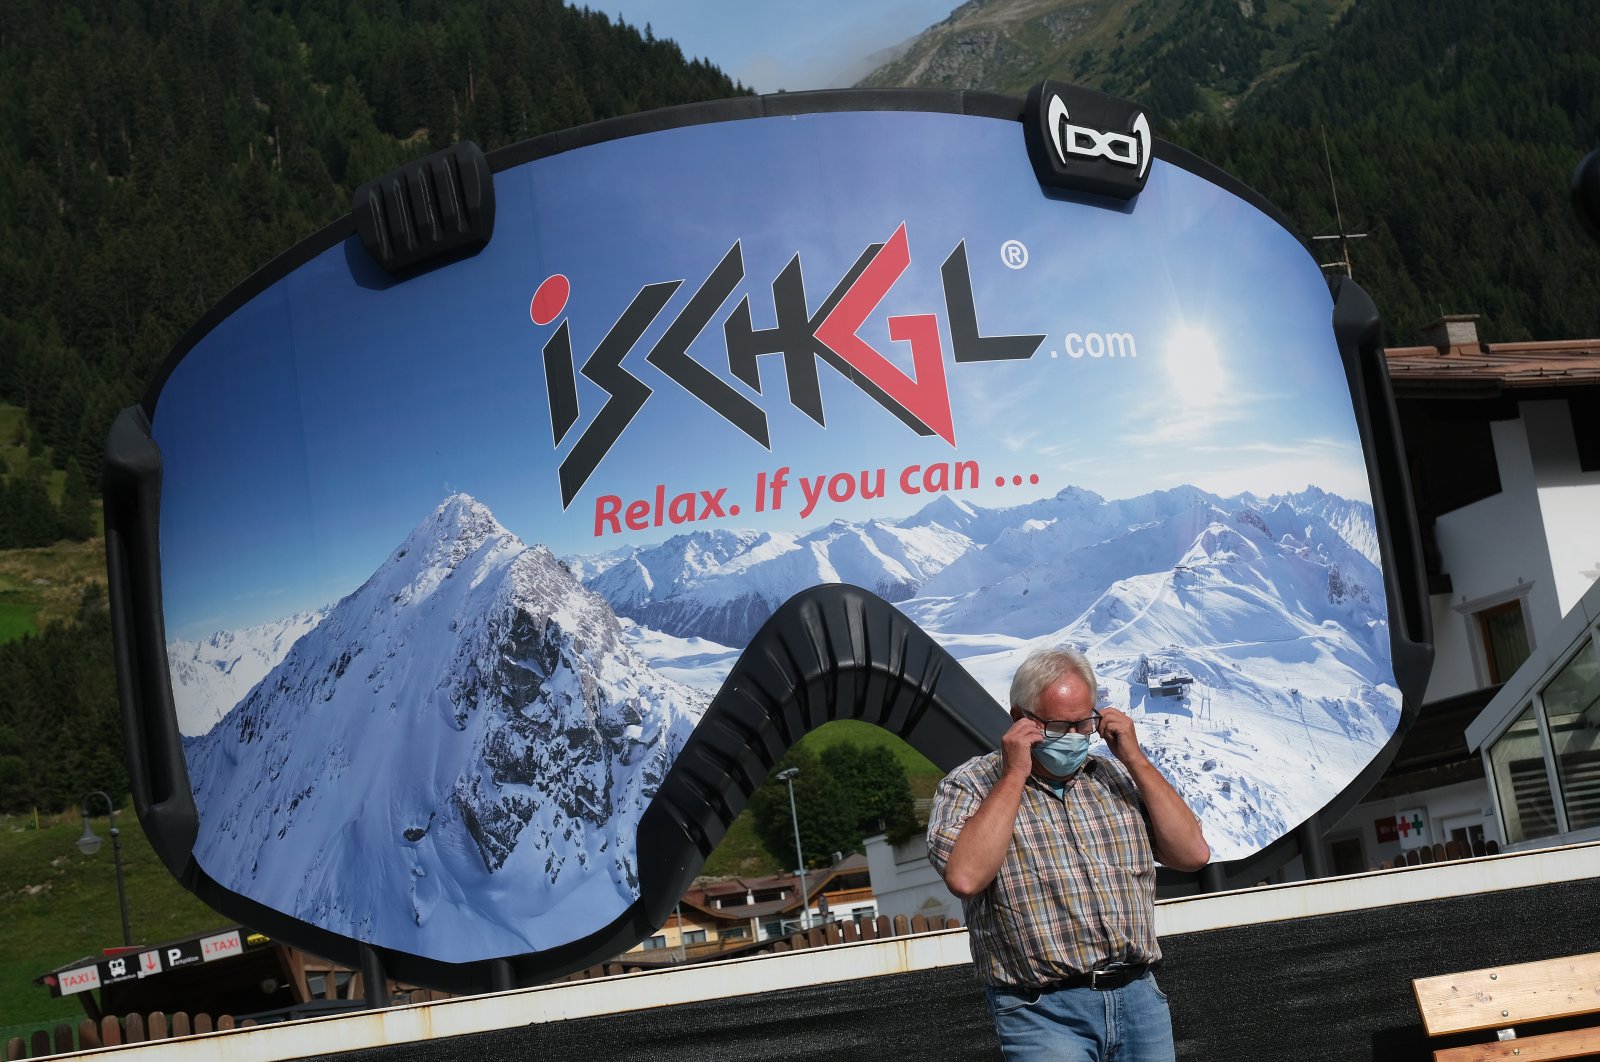 A man removes a protective face mask after photographing himself in front of an advertisement in the shape of ski goggles for the Ischgl ski resort on Sep. 10, 2020 in Ischgl, Austria. (Getty Images)